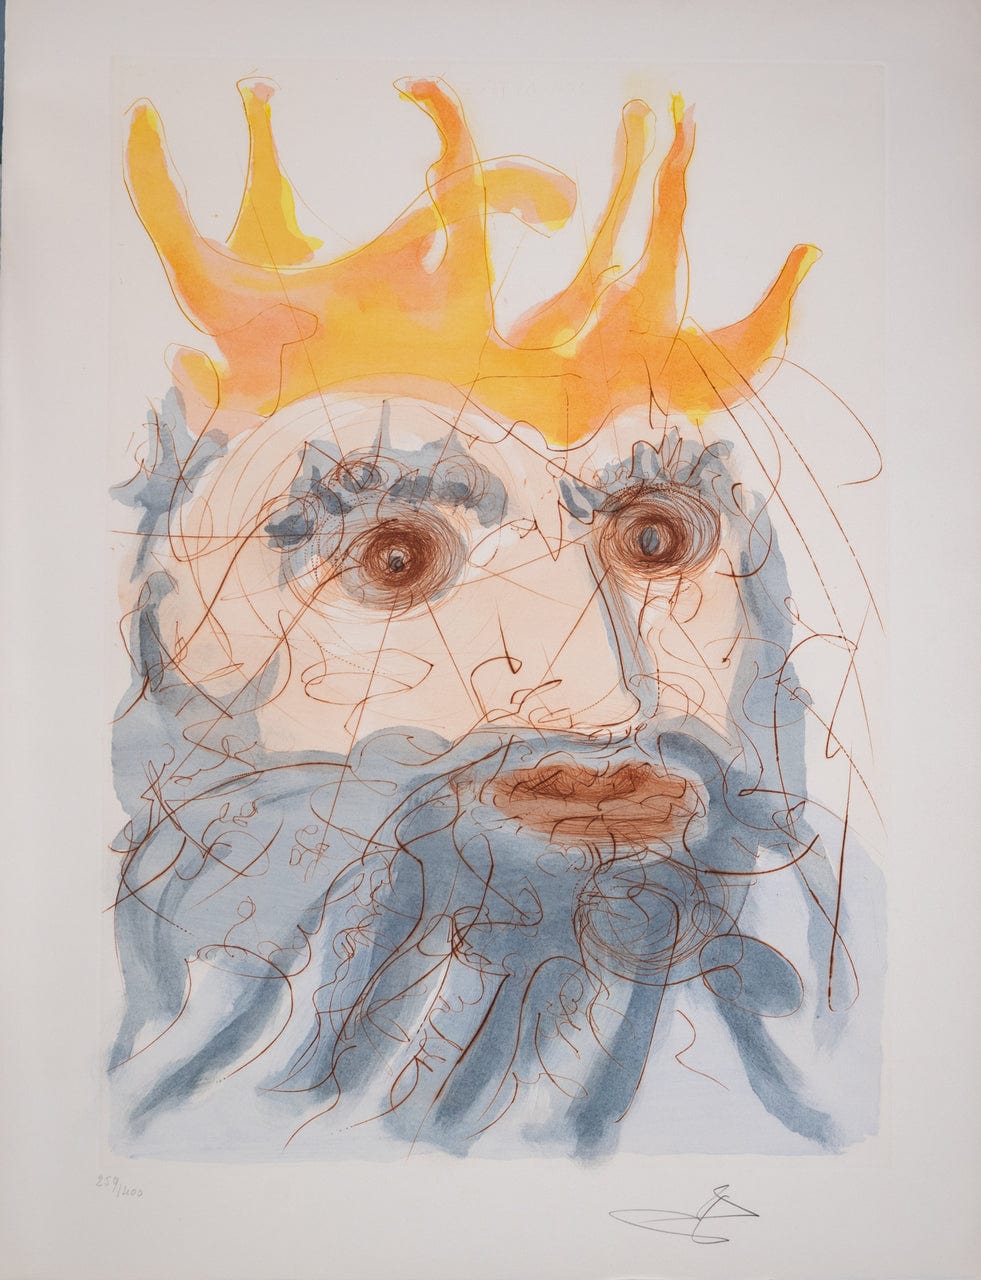 Salvador Dali; "King Saul " from Our Historical Heritage (1)